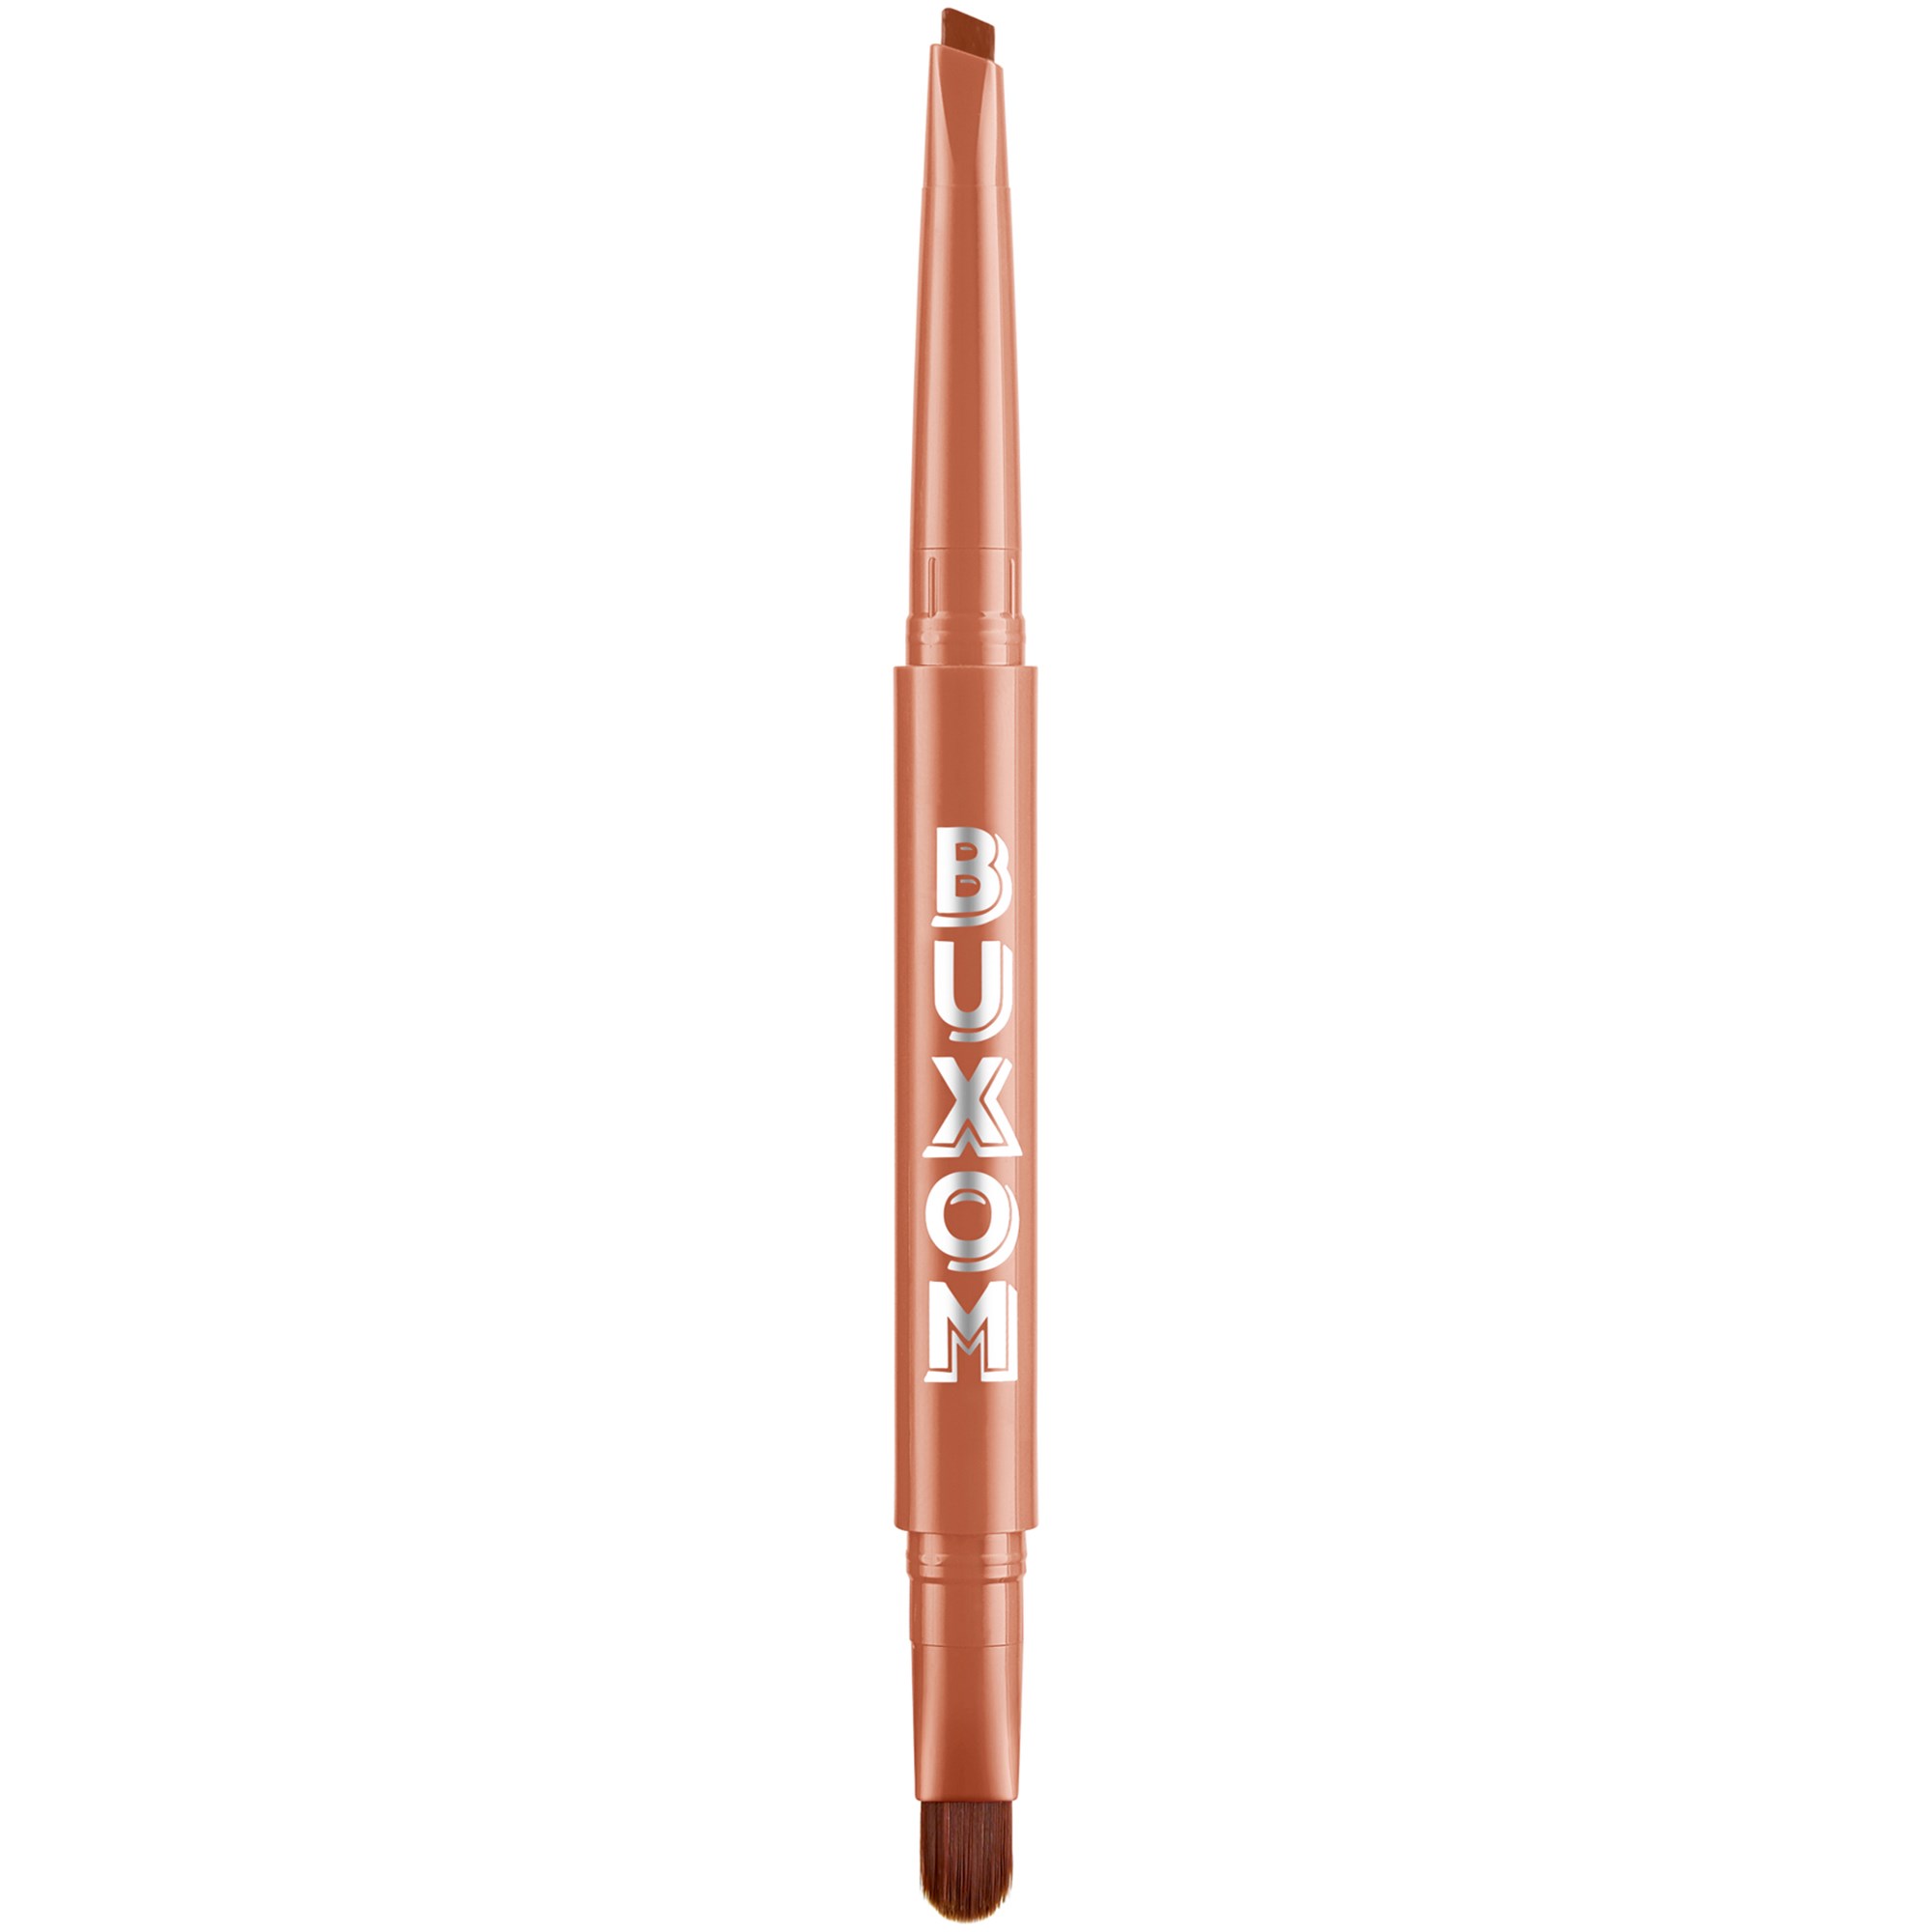 BUXOM Power Line Plumping Lip Liner Warm Nude / Smooth Spice